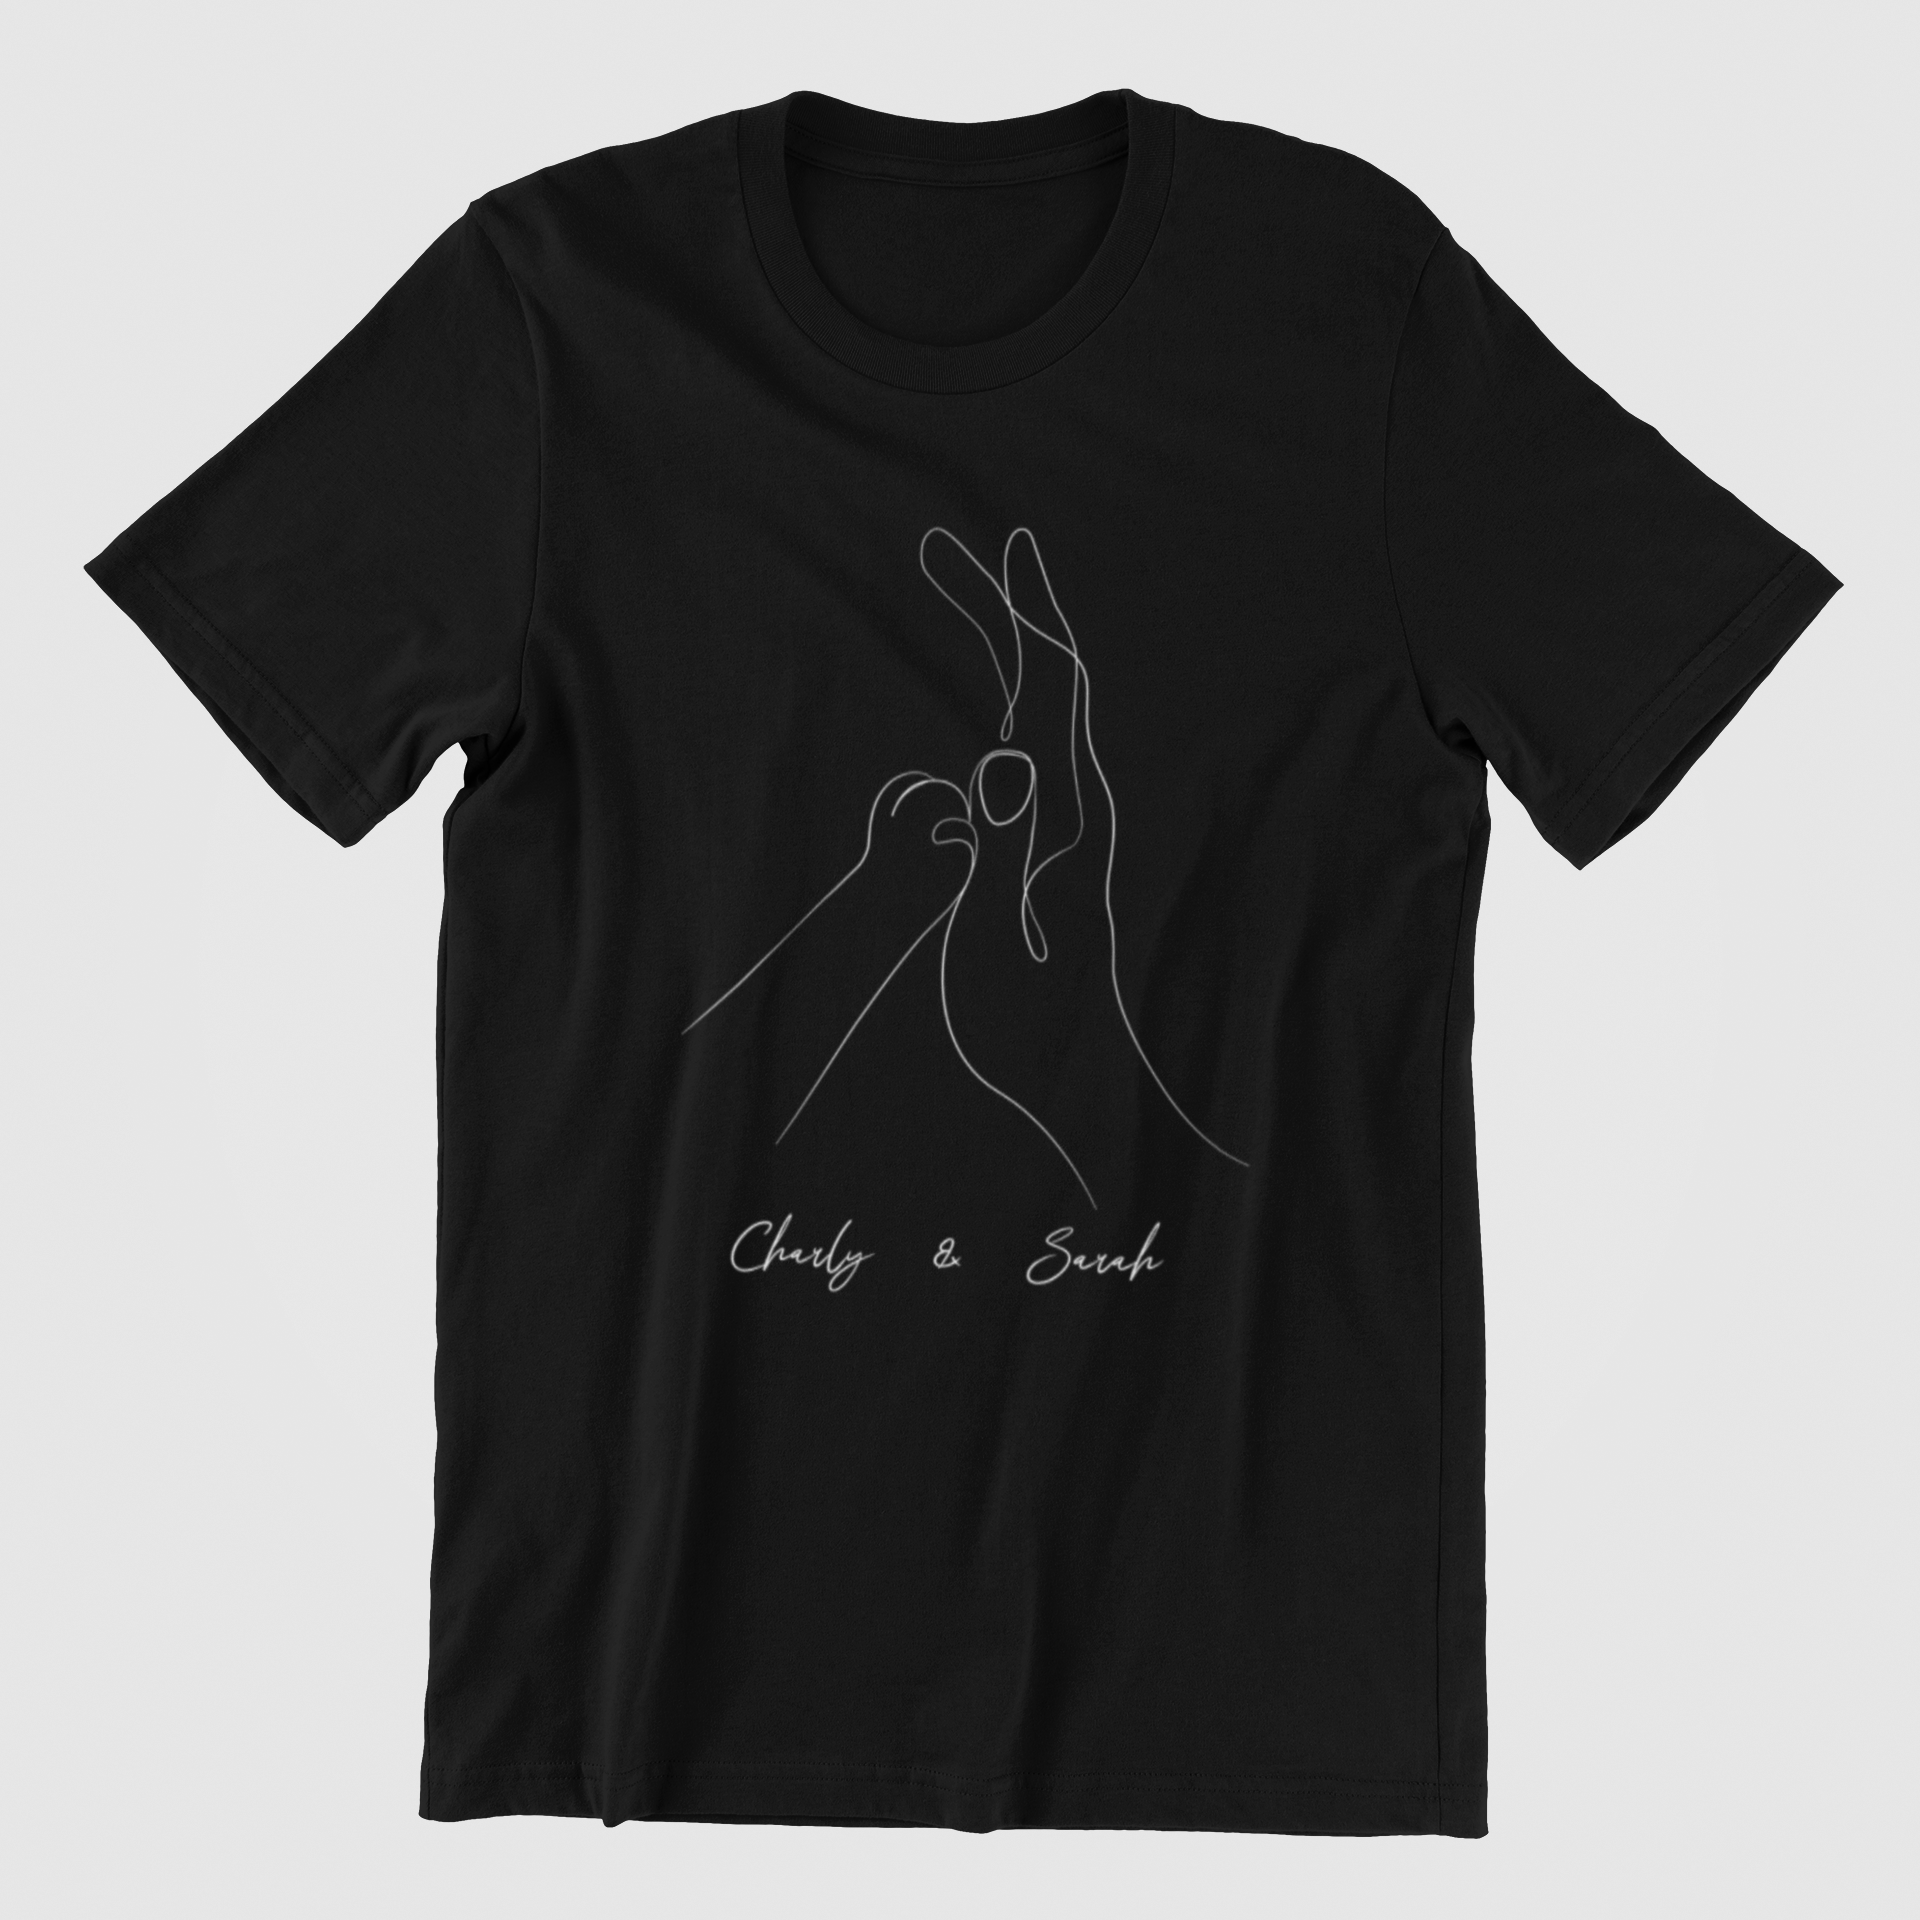 Black T-shirt with Human & Cat Paw T-Shirt featuring a custom design of a cat paw and human hand holding each other, symbolizing the bond between pet and owner.